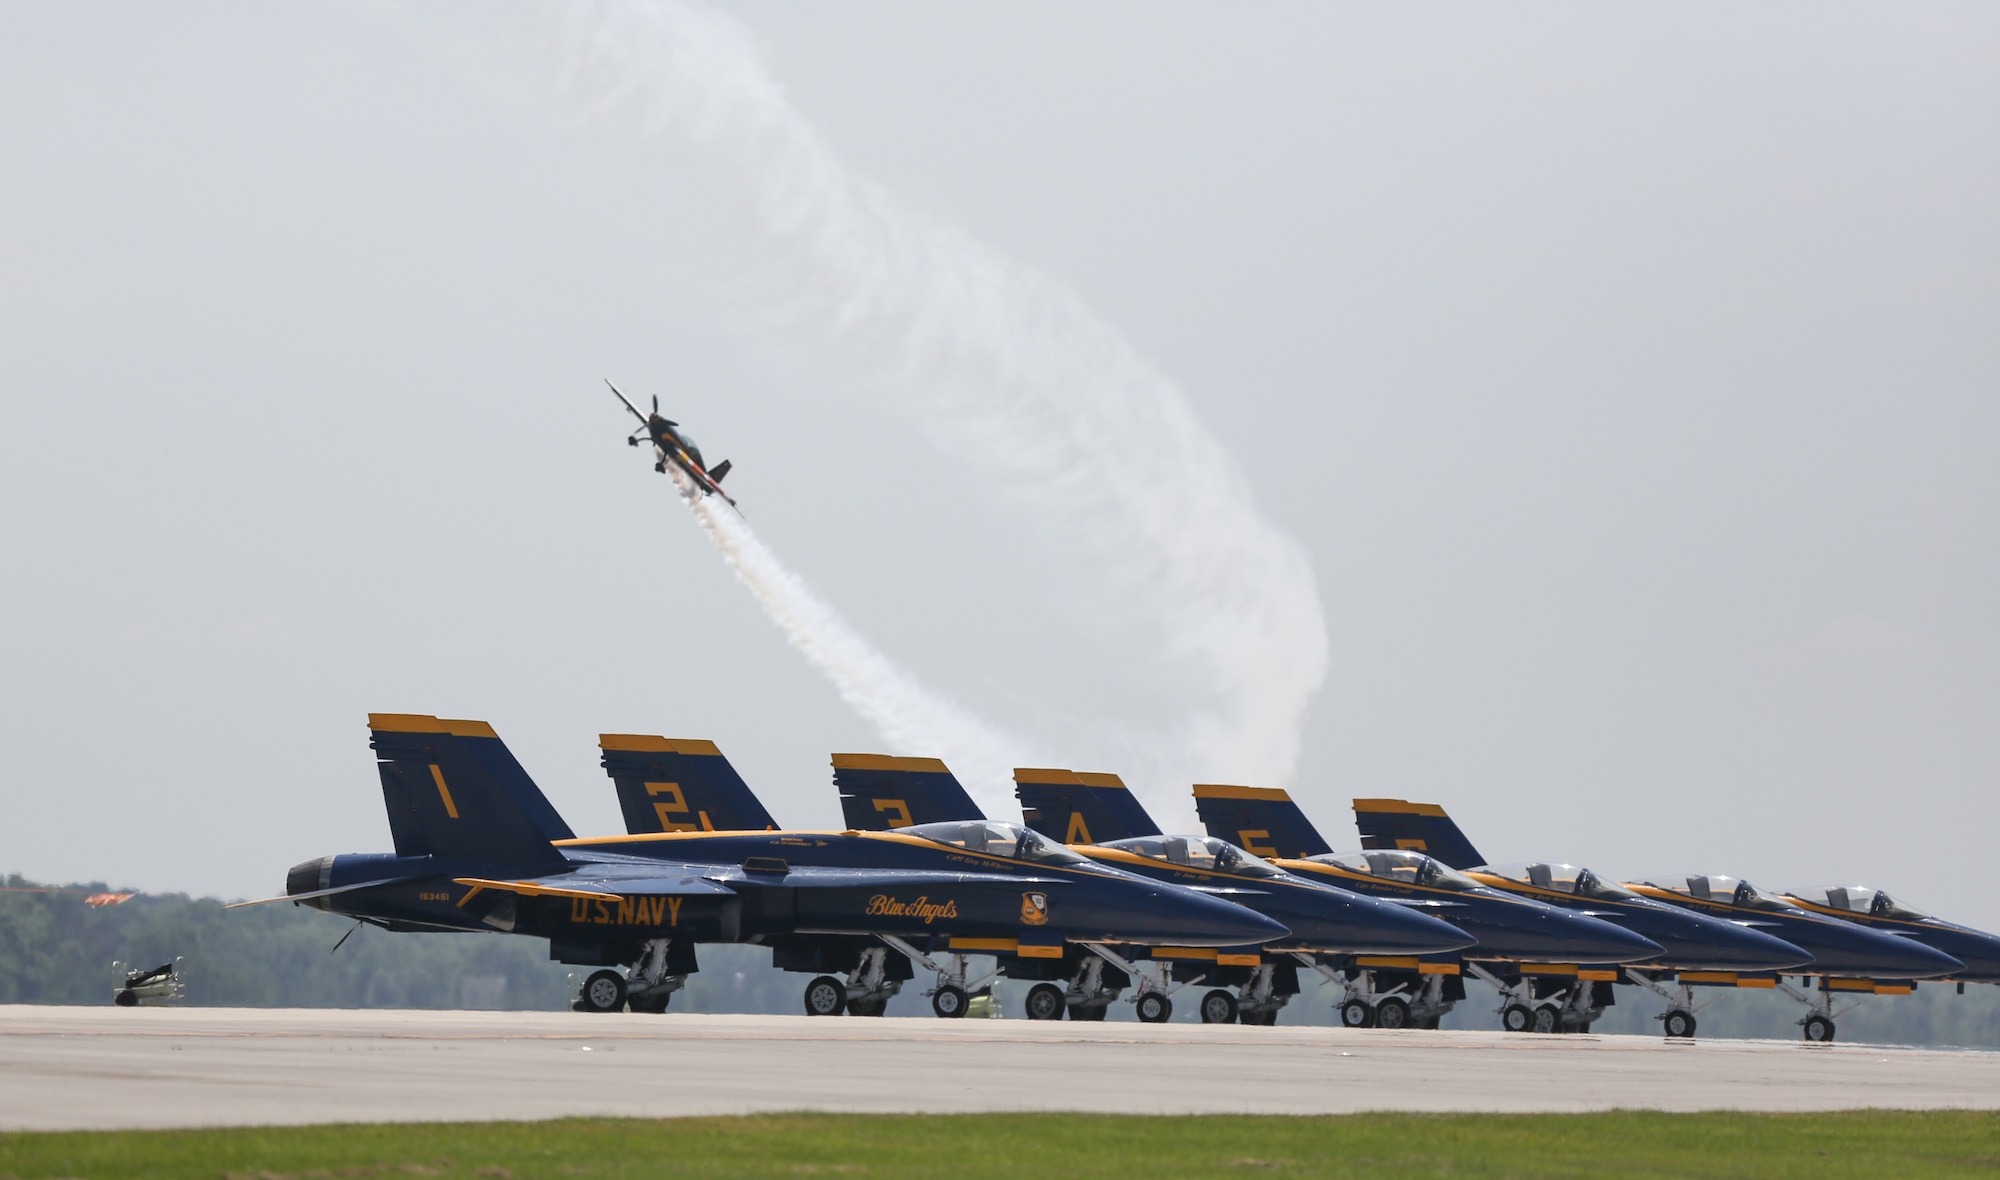 Approximately 100,000 people turned out to Robins Air Force Base to witness the 2012 Air Show and the Blue Angels. (U.S. Air Force photo by 1st Lt. Joel Cooke)